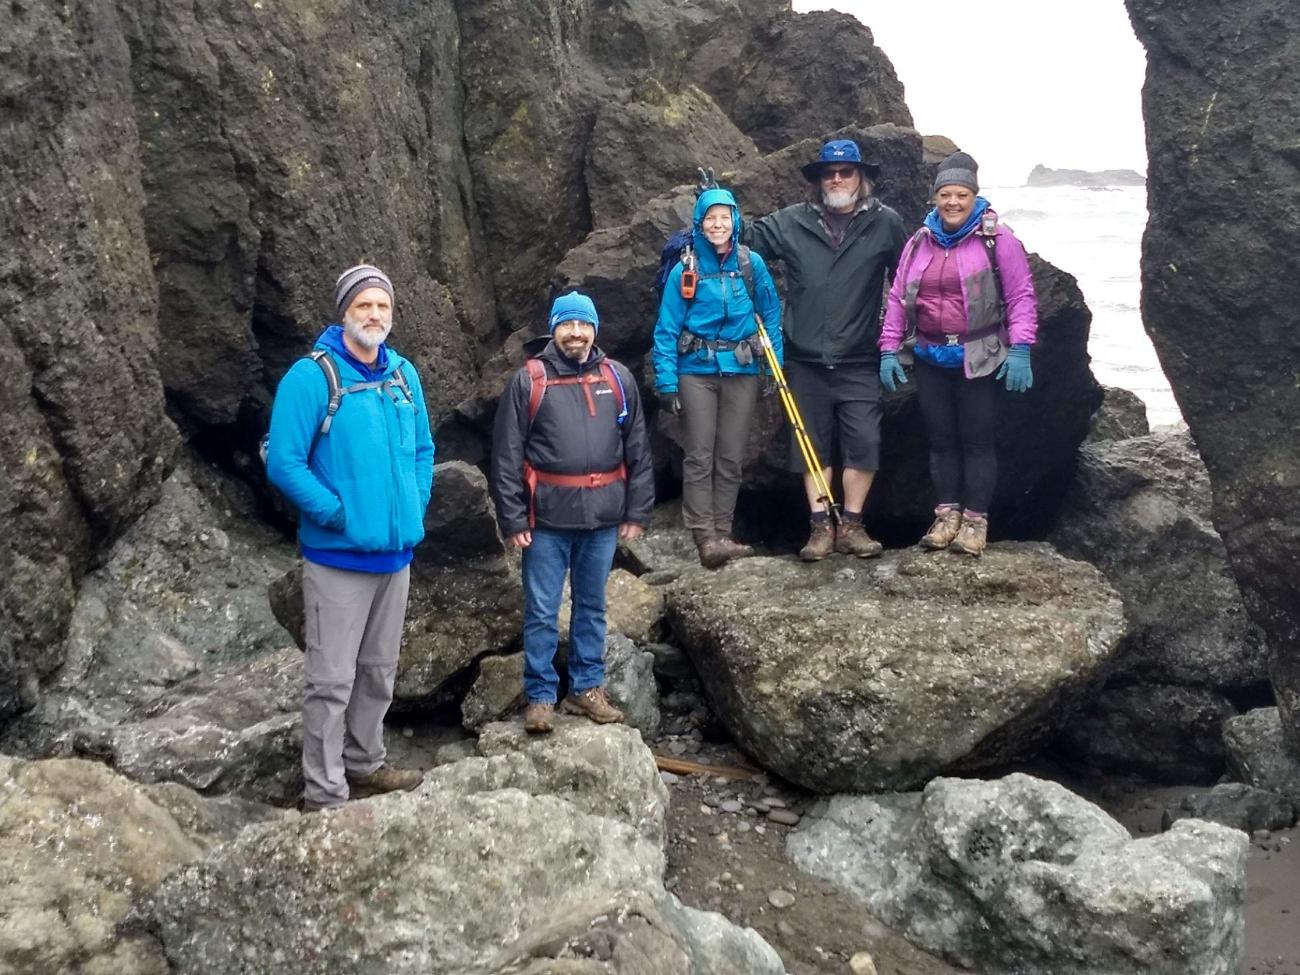 Five people wearing rain jackets stand on rocks with the ocean in the background